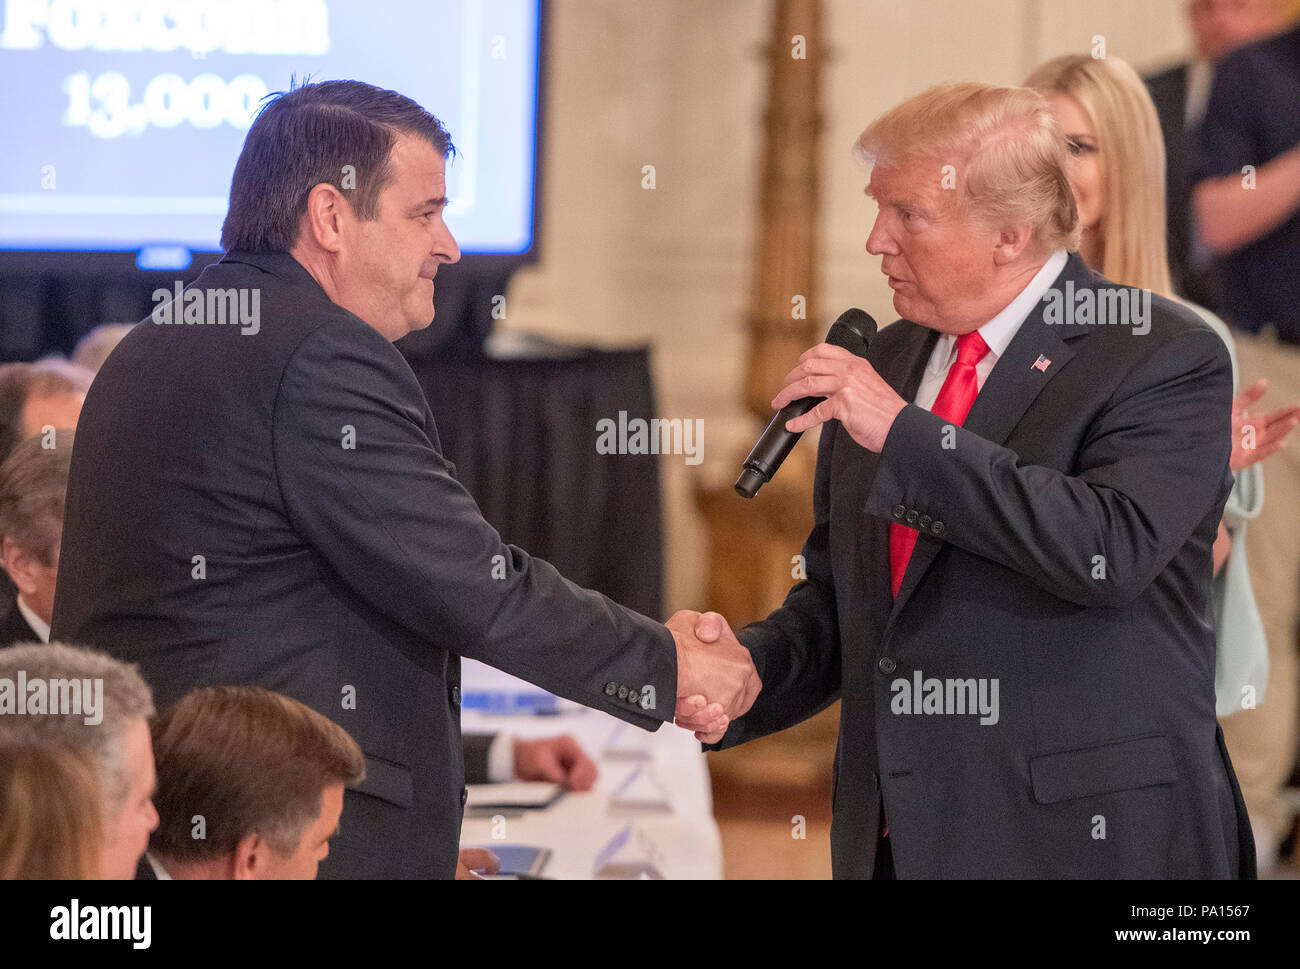 Washington DC, USA. 19th July, 2018. United States President Donald J. Trump, right, shakes hands with retired US Navy Captain Chris Murdoch, special advisor, Foxconn, left, who agreed to target 13,000 jobs after the President signed an Executive Order establishing the National Council for the American Worker, which the Trump Administration calls 'an Interagency Council of Administration officials who will focus on crafting solutions to our country's urgent workforce issues' in the East Room of the White House in Washington, DC on Thursday, July 19, 2018. Credit: MediaPunch Inc/Alamy Live News Stock Photo